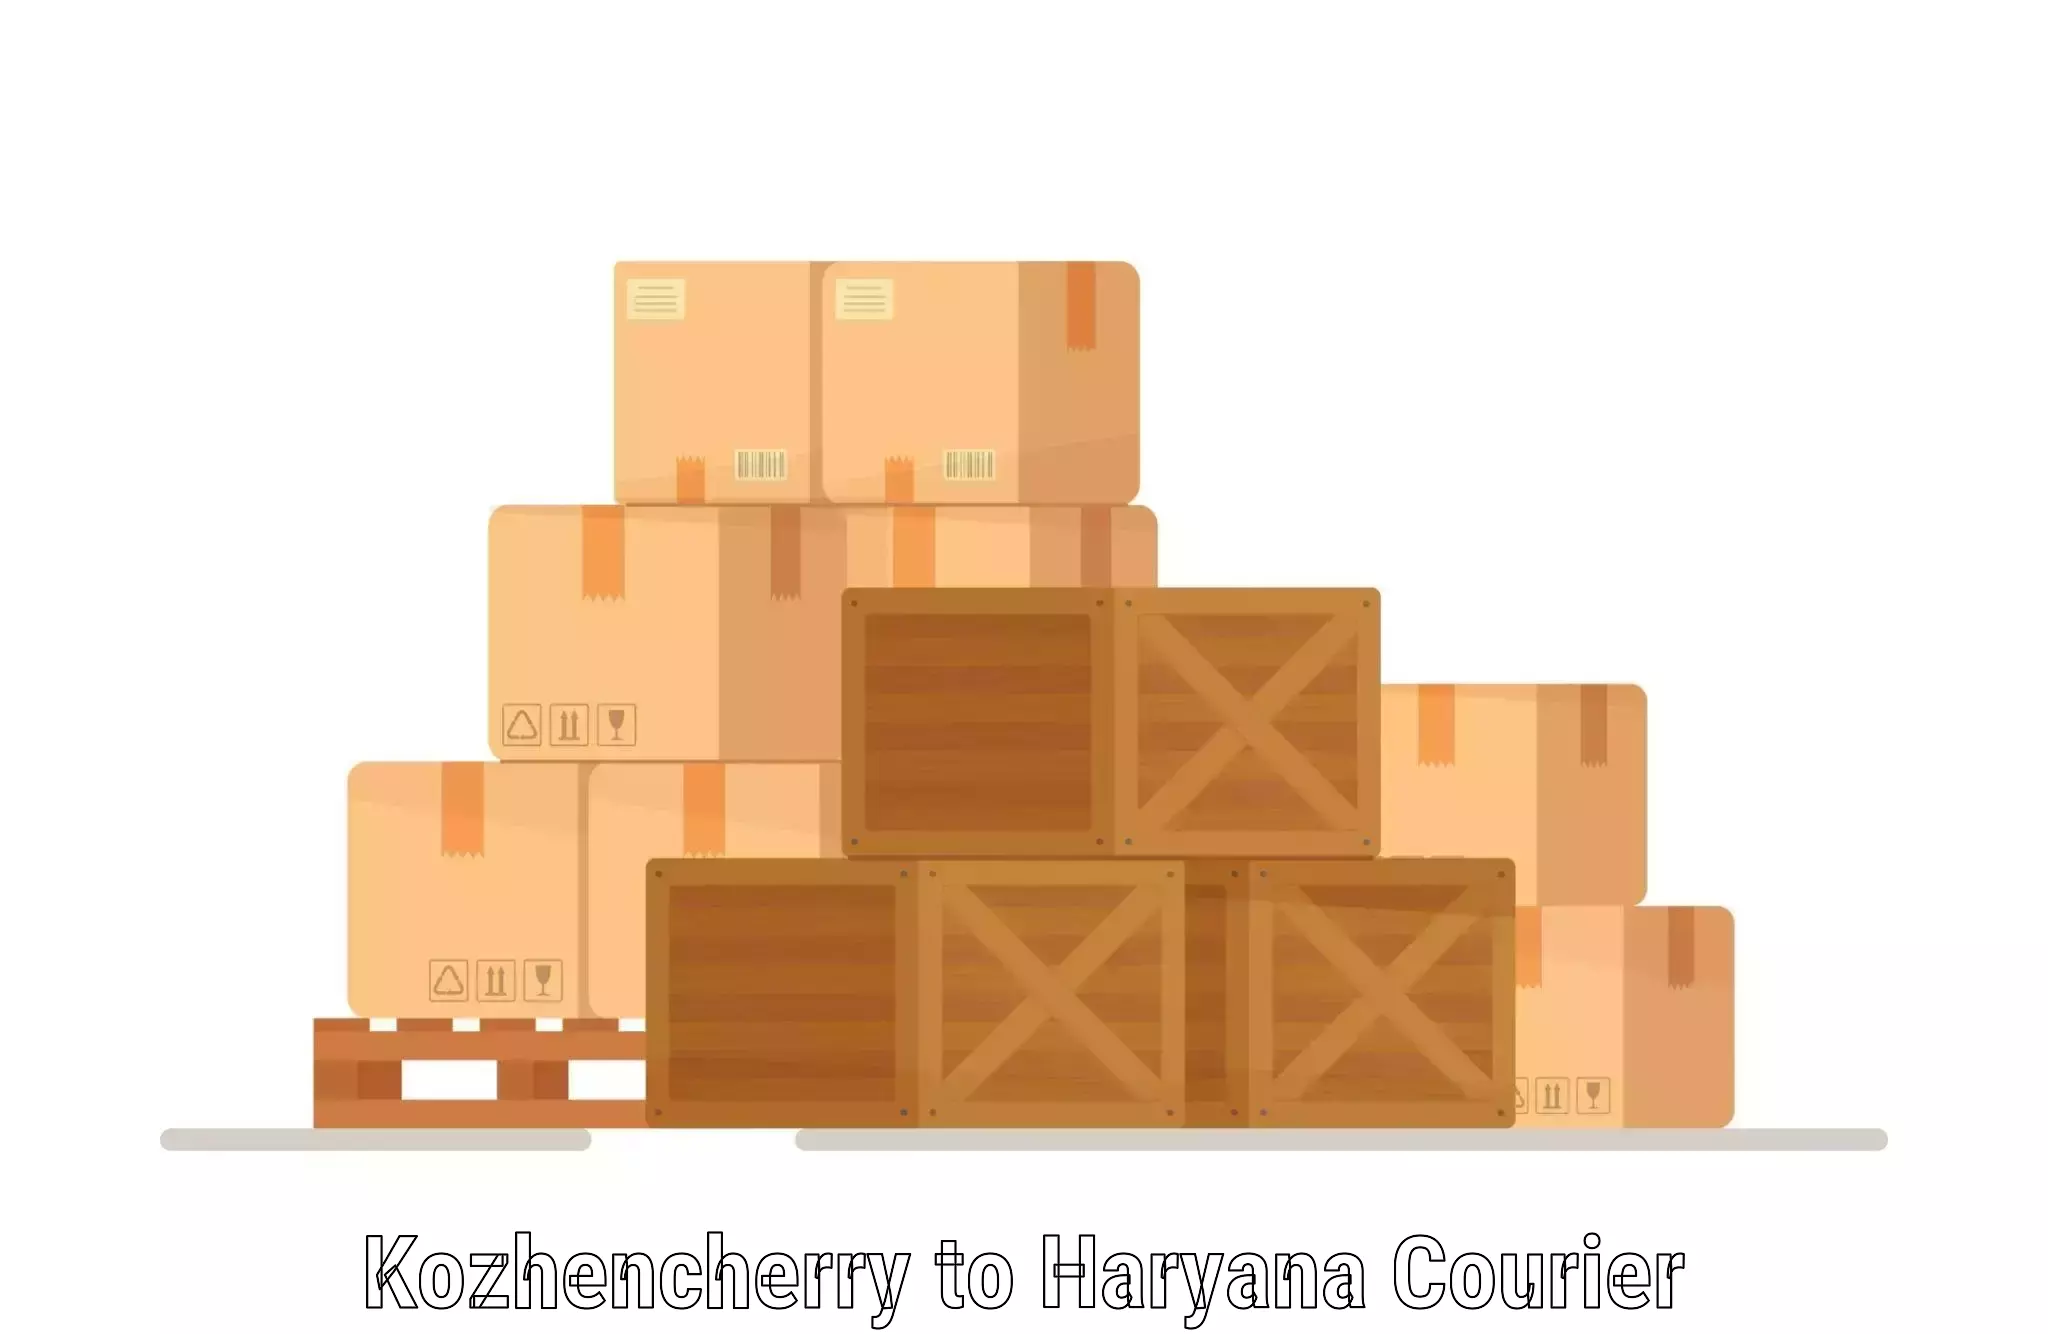 Package delivery network Kozhencherry to Haryana